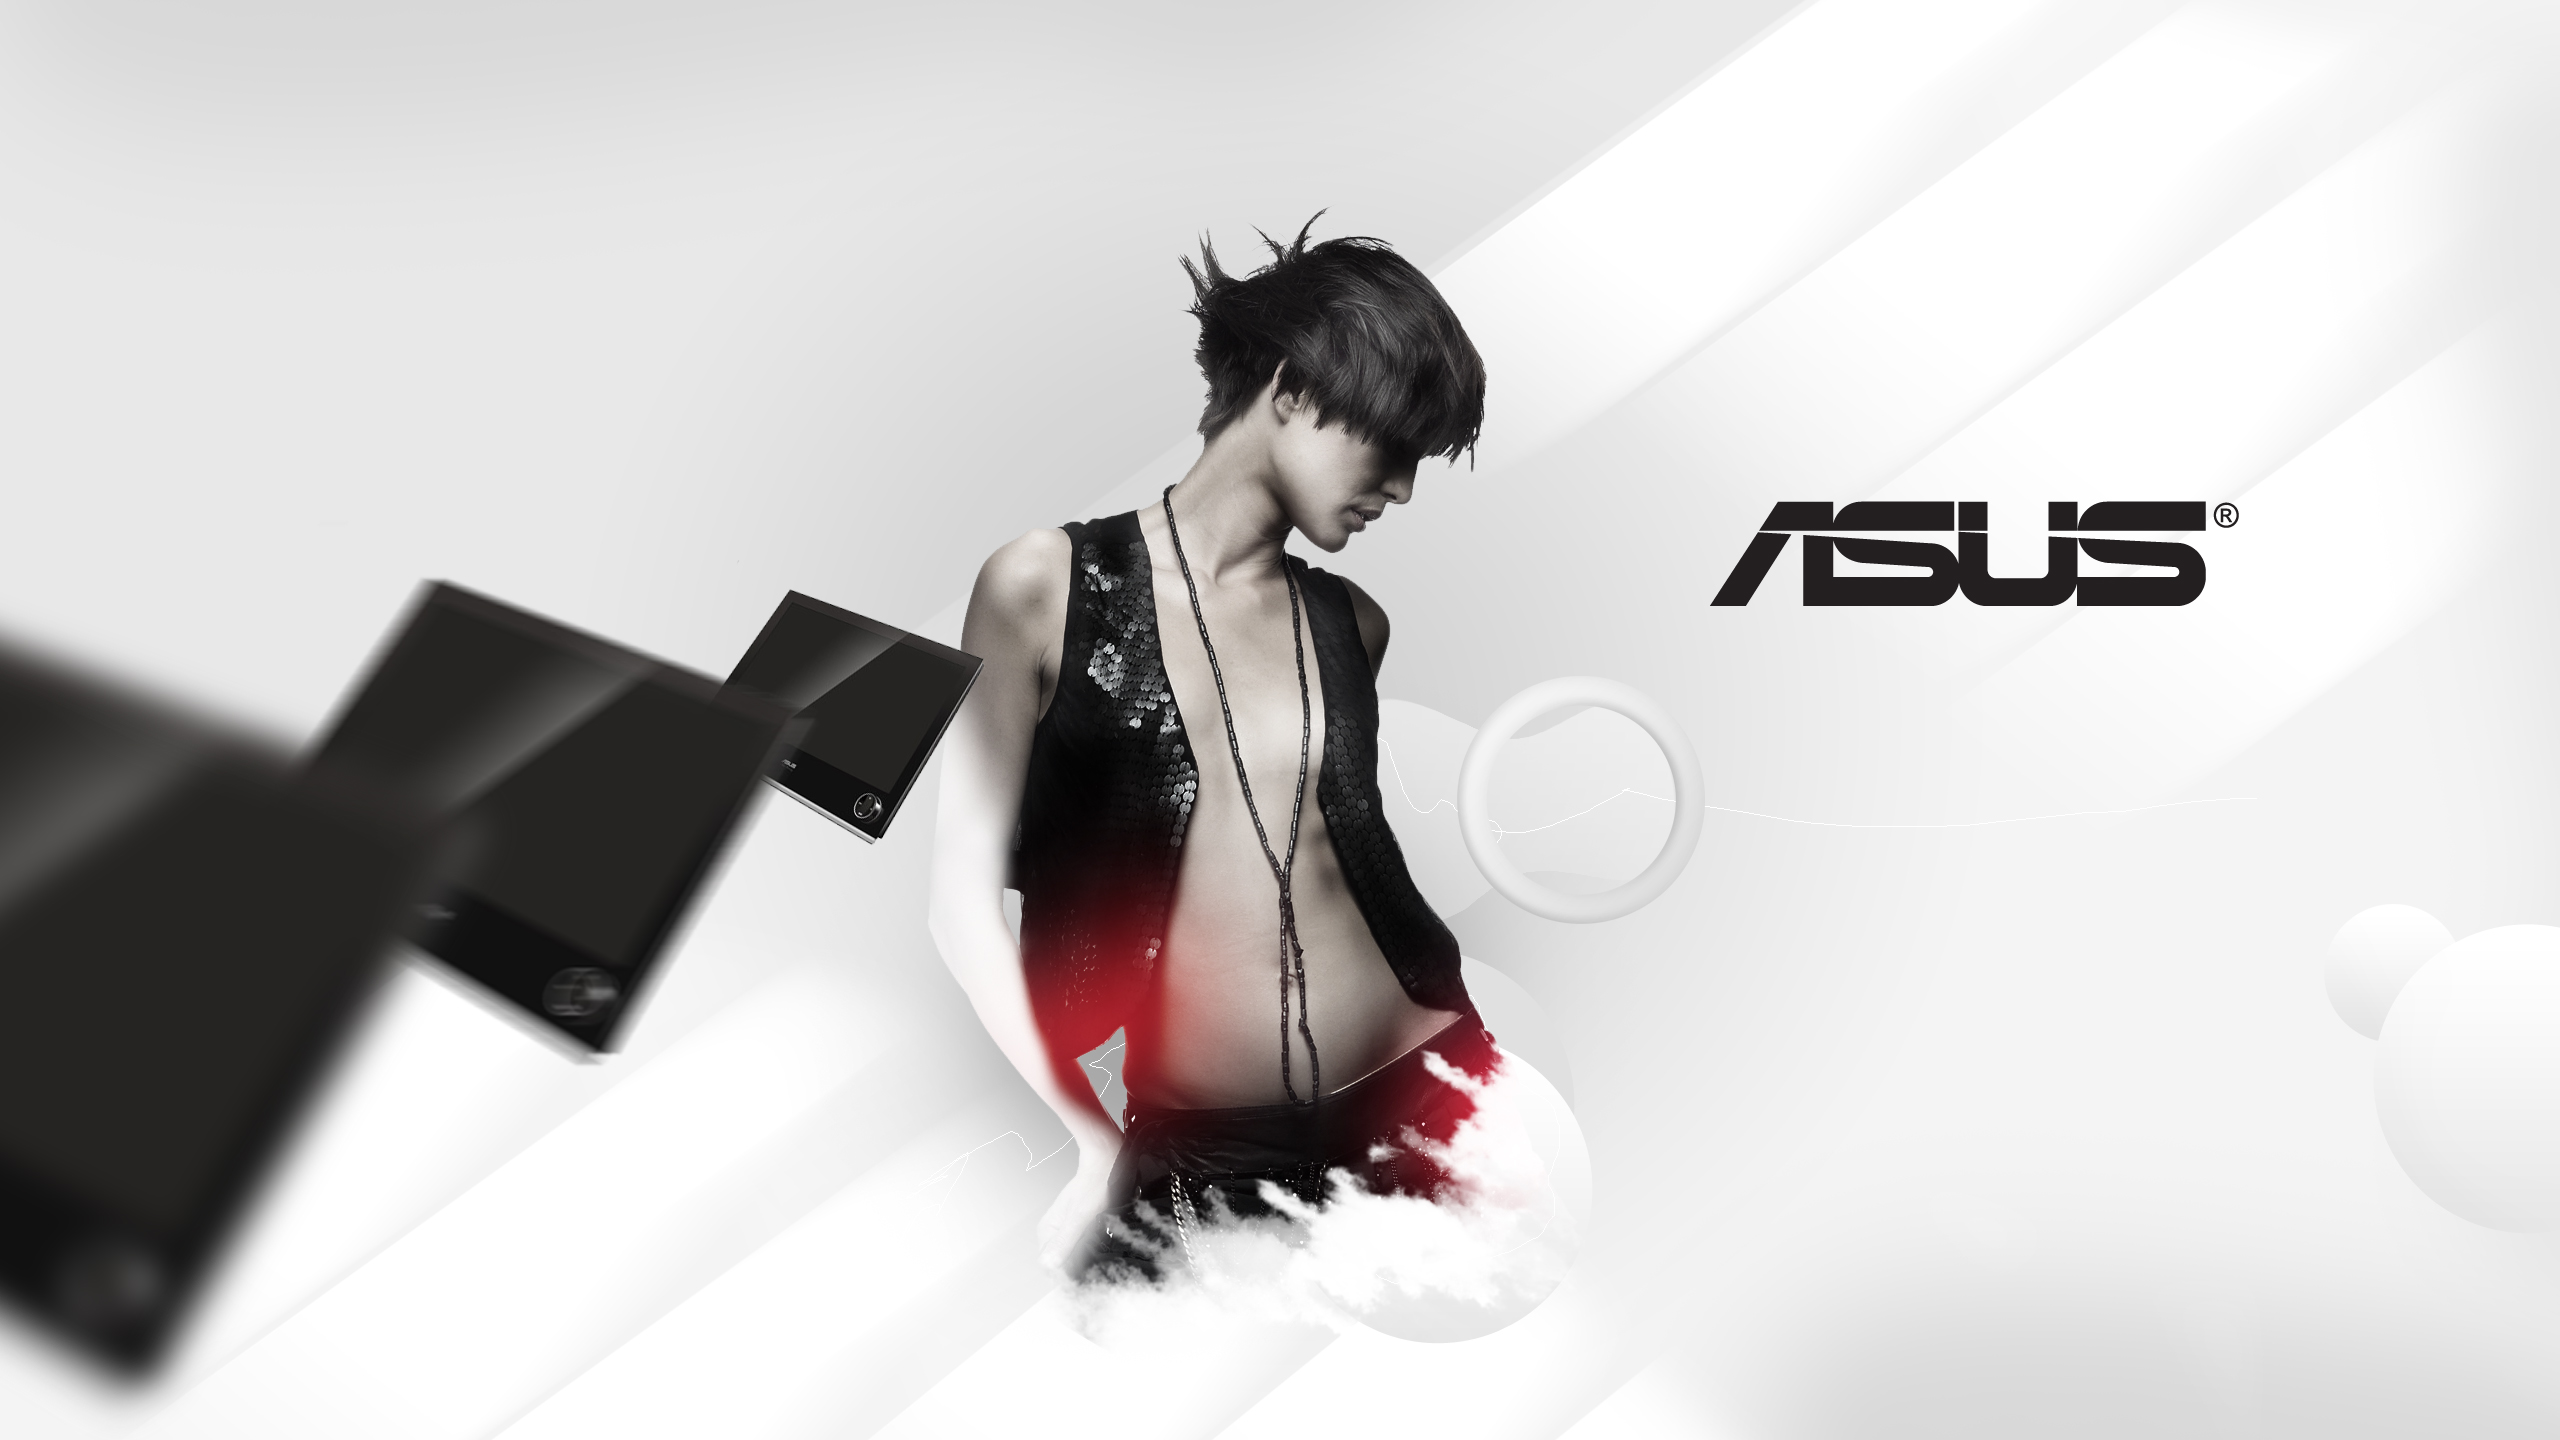 ASUS Wallpaper by colorlabelstudio on